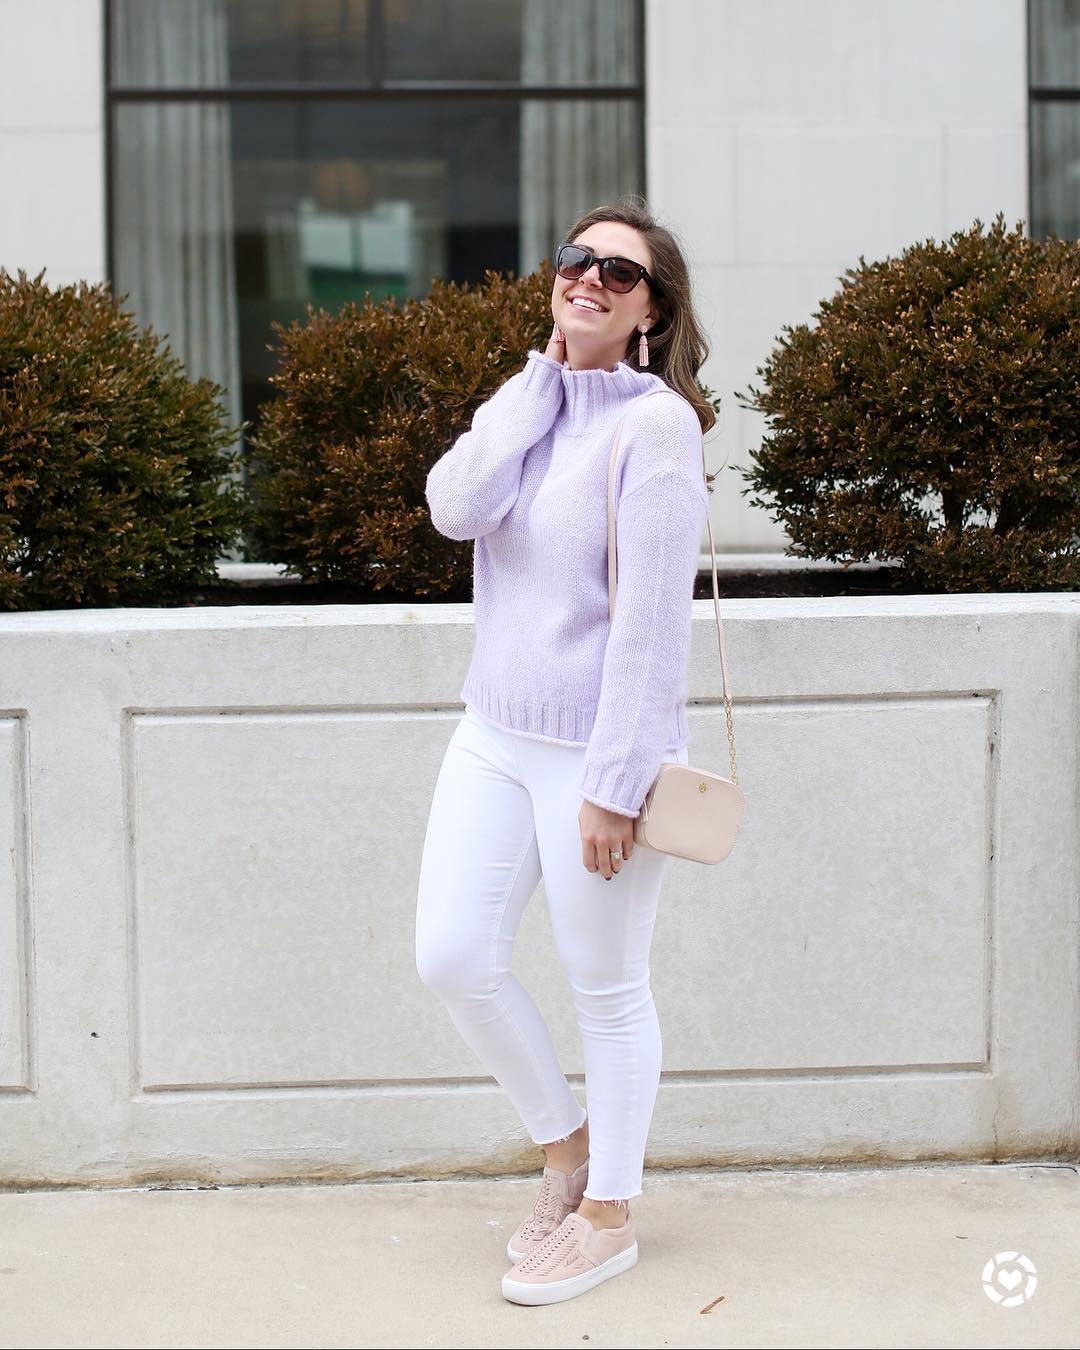 Rocking Lavender Sweater With White Denim Jeans And Sneakers